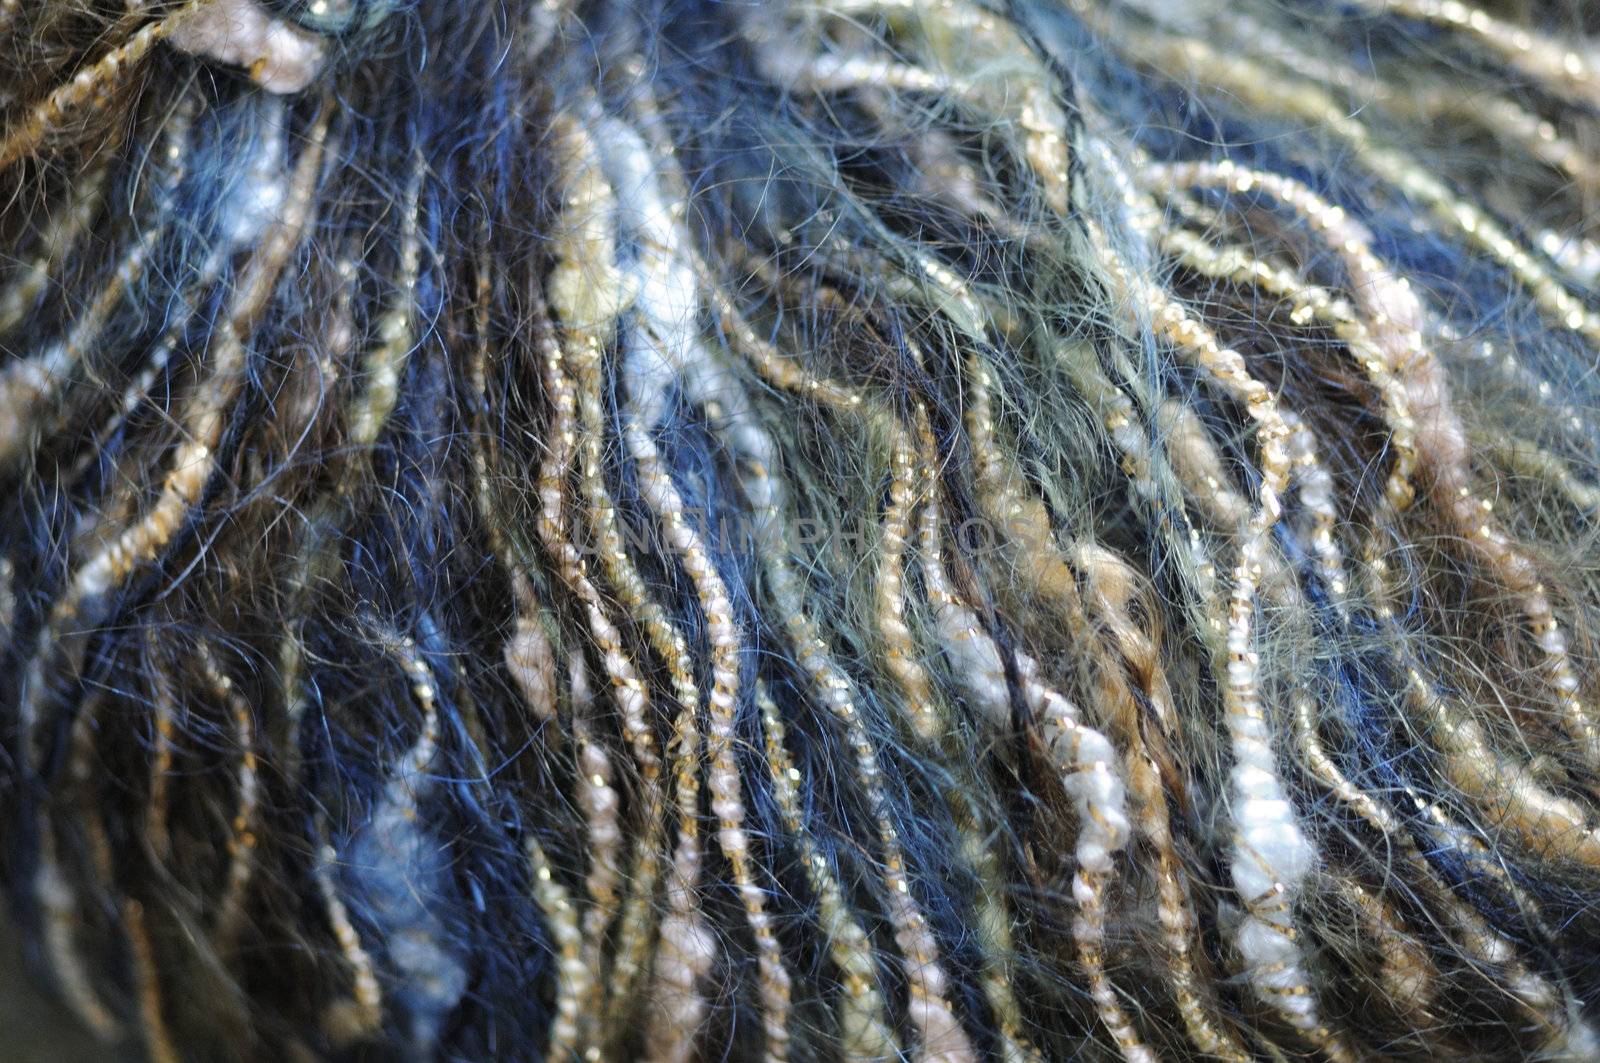 Close-up texture of a variegated ball of soft fuzzy yarn in tones of blue, gold, green, and white.  Curvy lines of yarn radiate out from the top center.